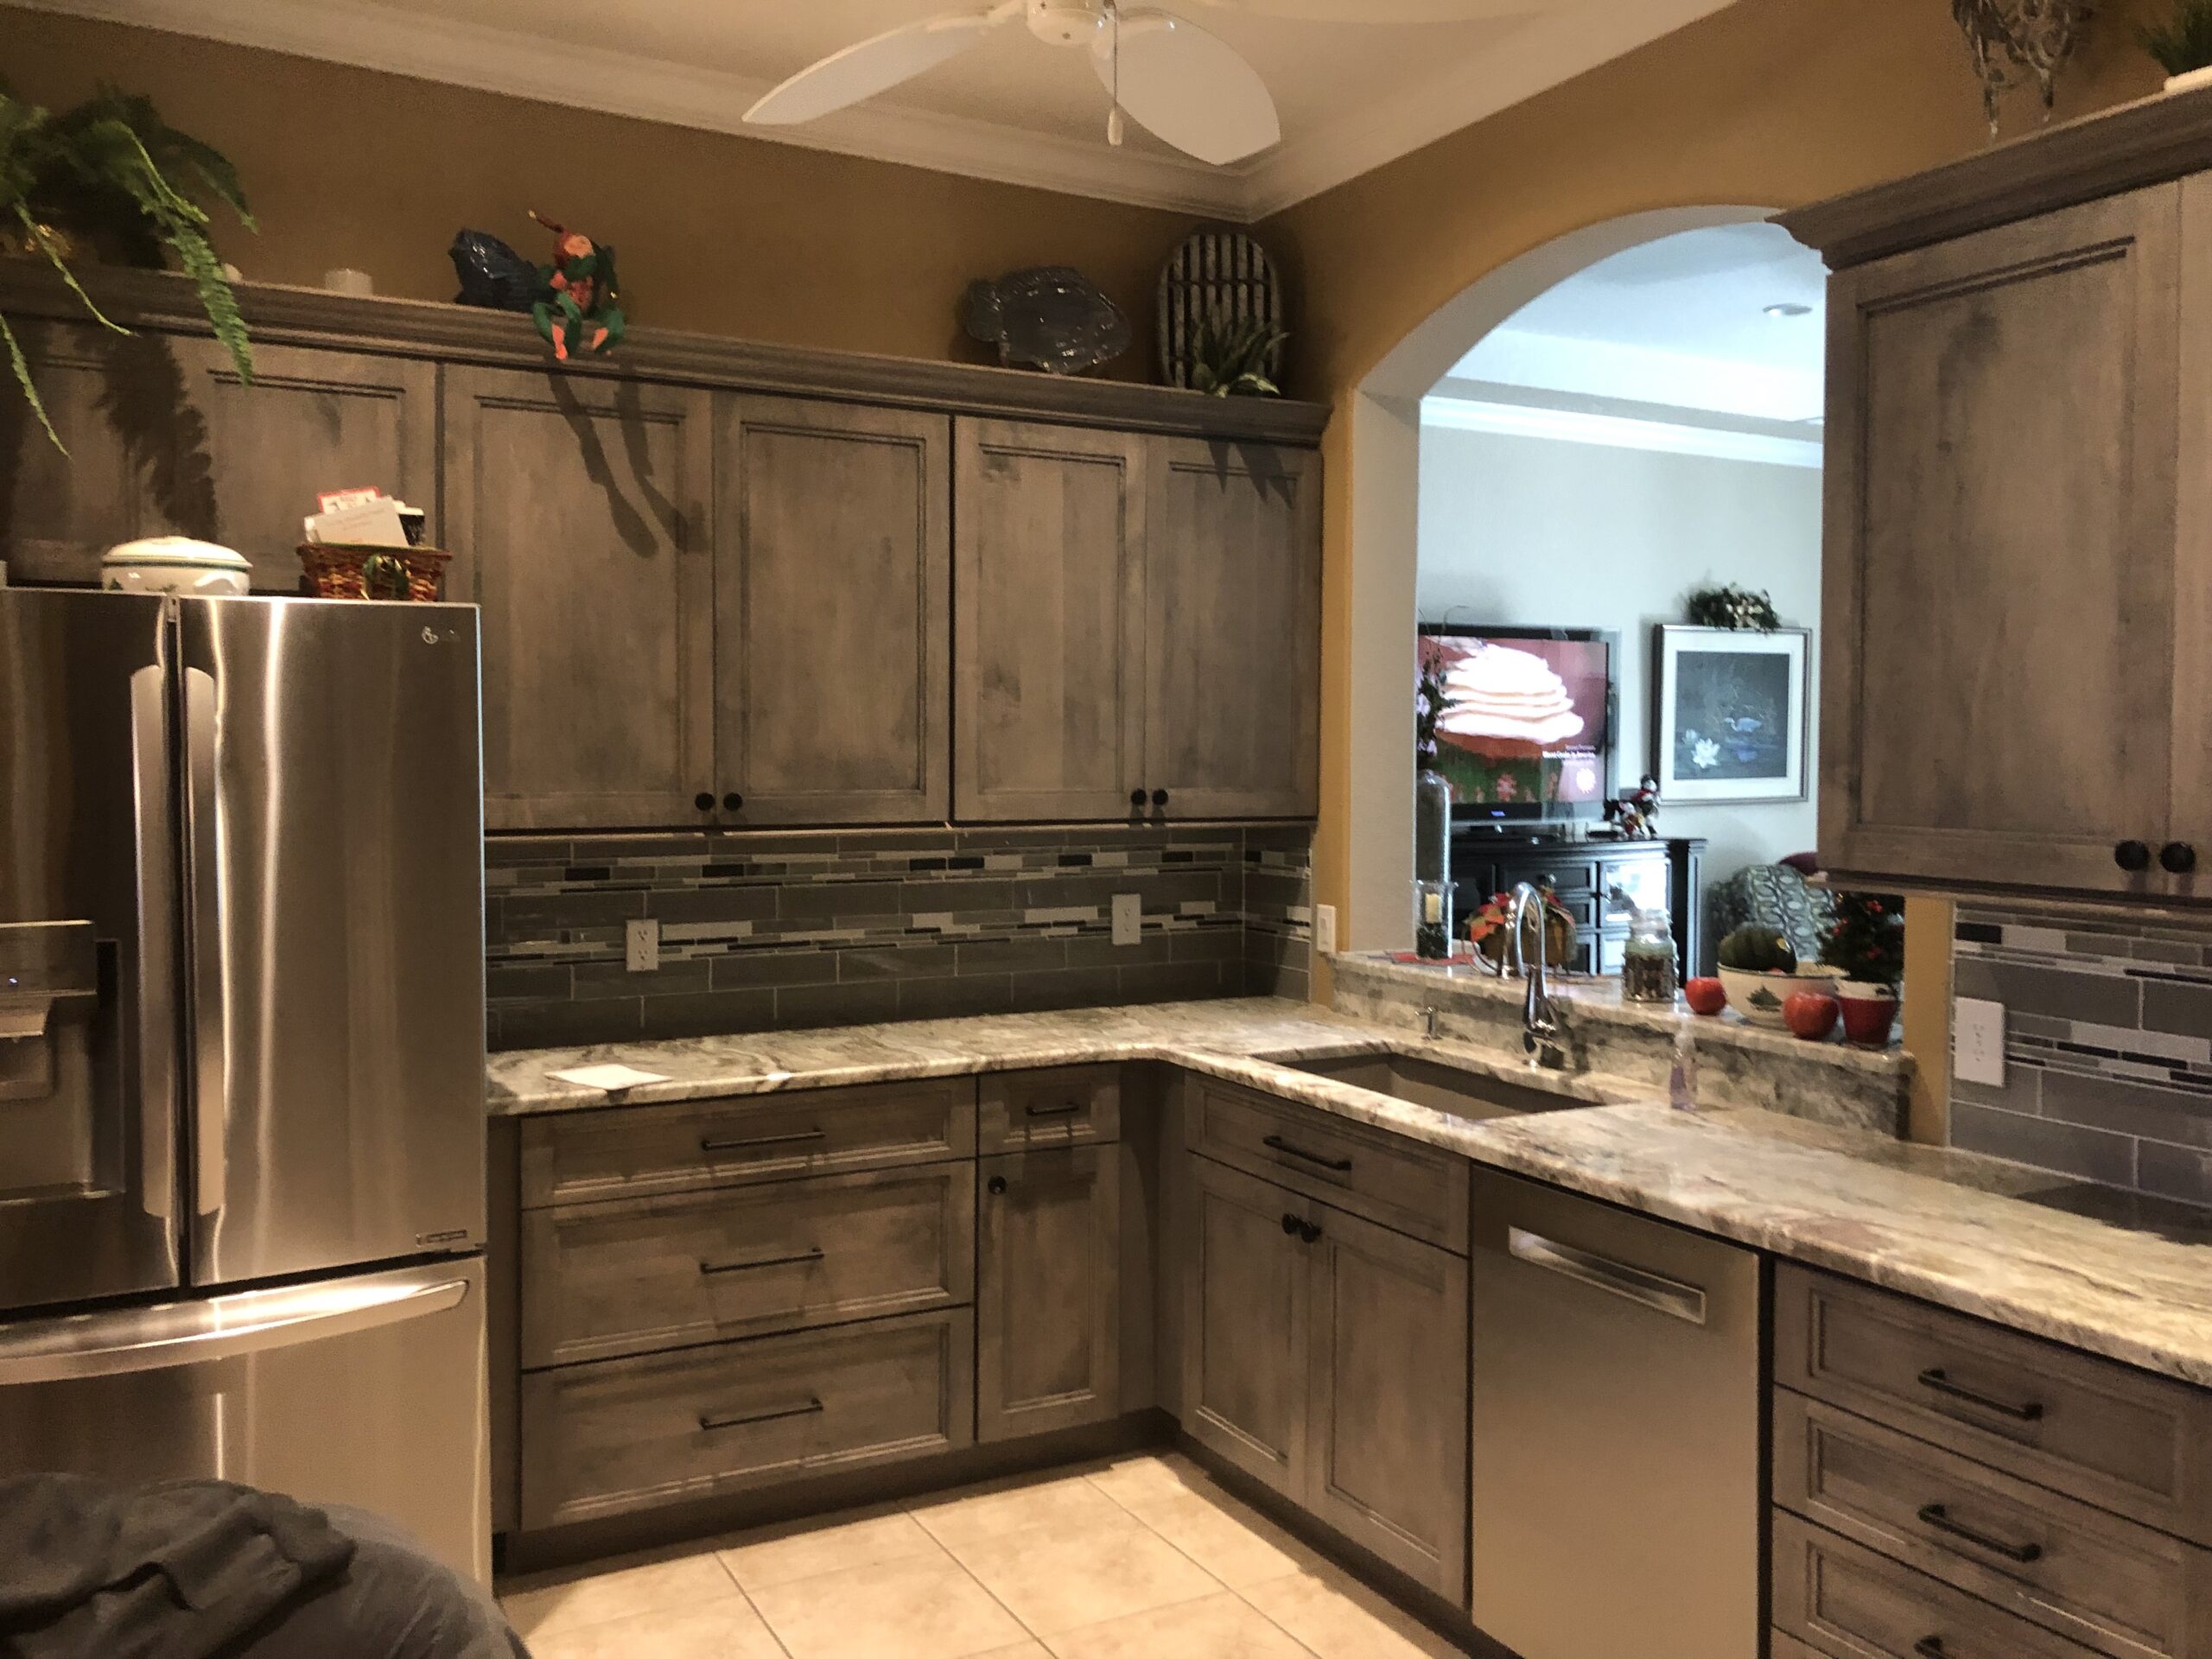 Modern, Stylish, and High Quality Stained Cherry Kitchen Cabinets in Tampa